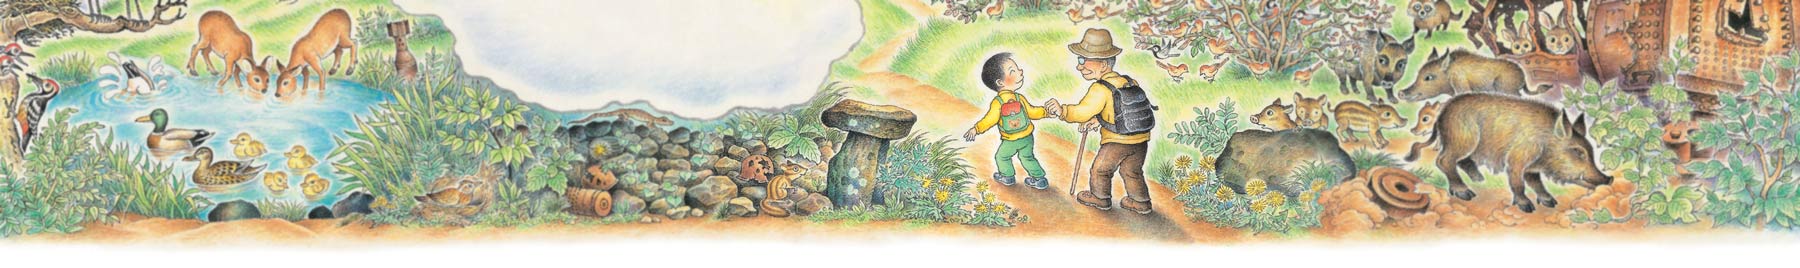 Artwork from Uk-Bae Lee’s picture book, When Spring Comes to the DMZ